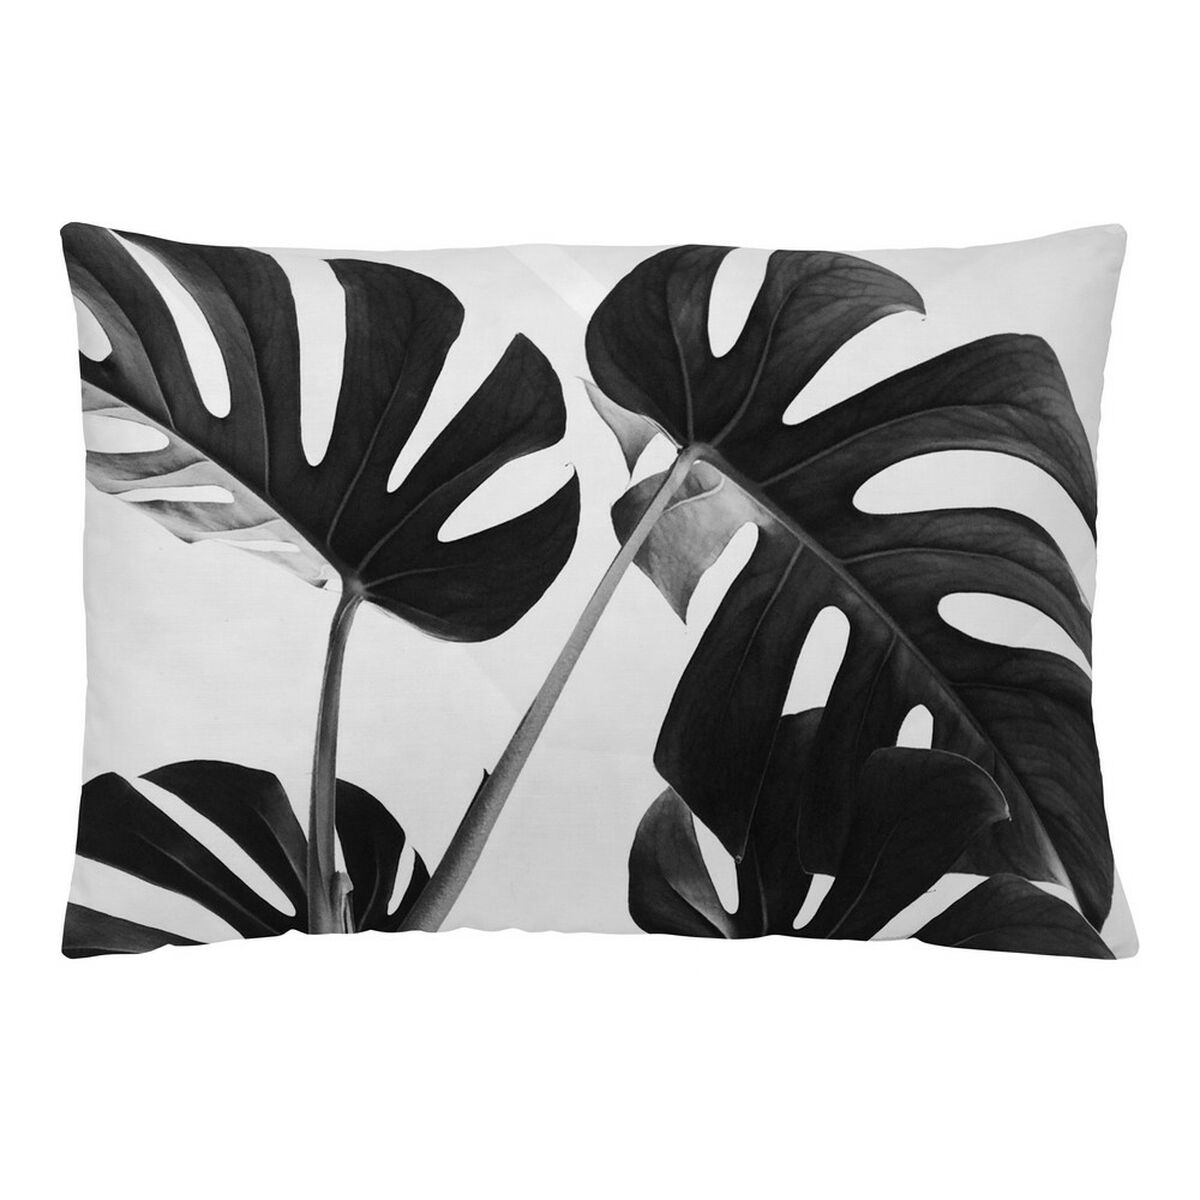 Cushion cover Naturals Belice (50 x 30 cm)